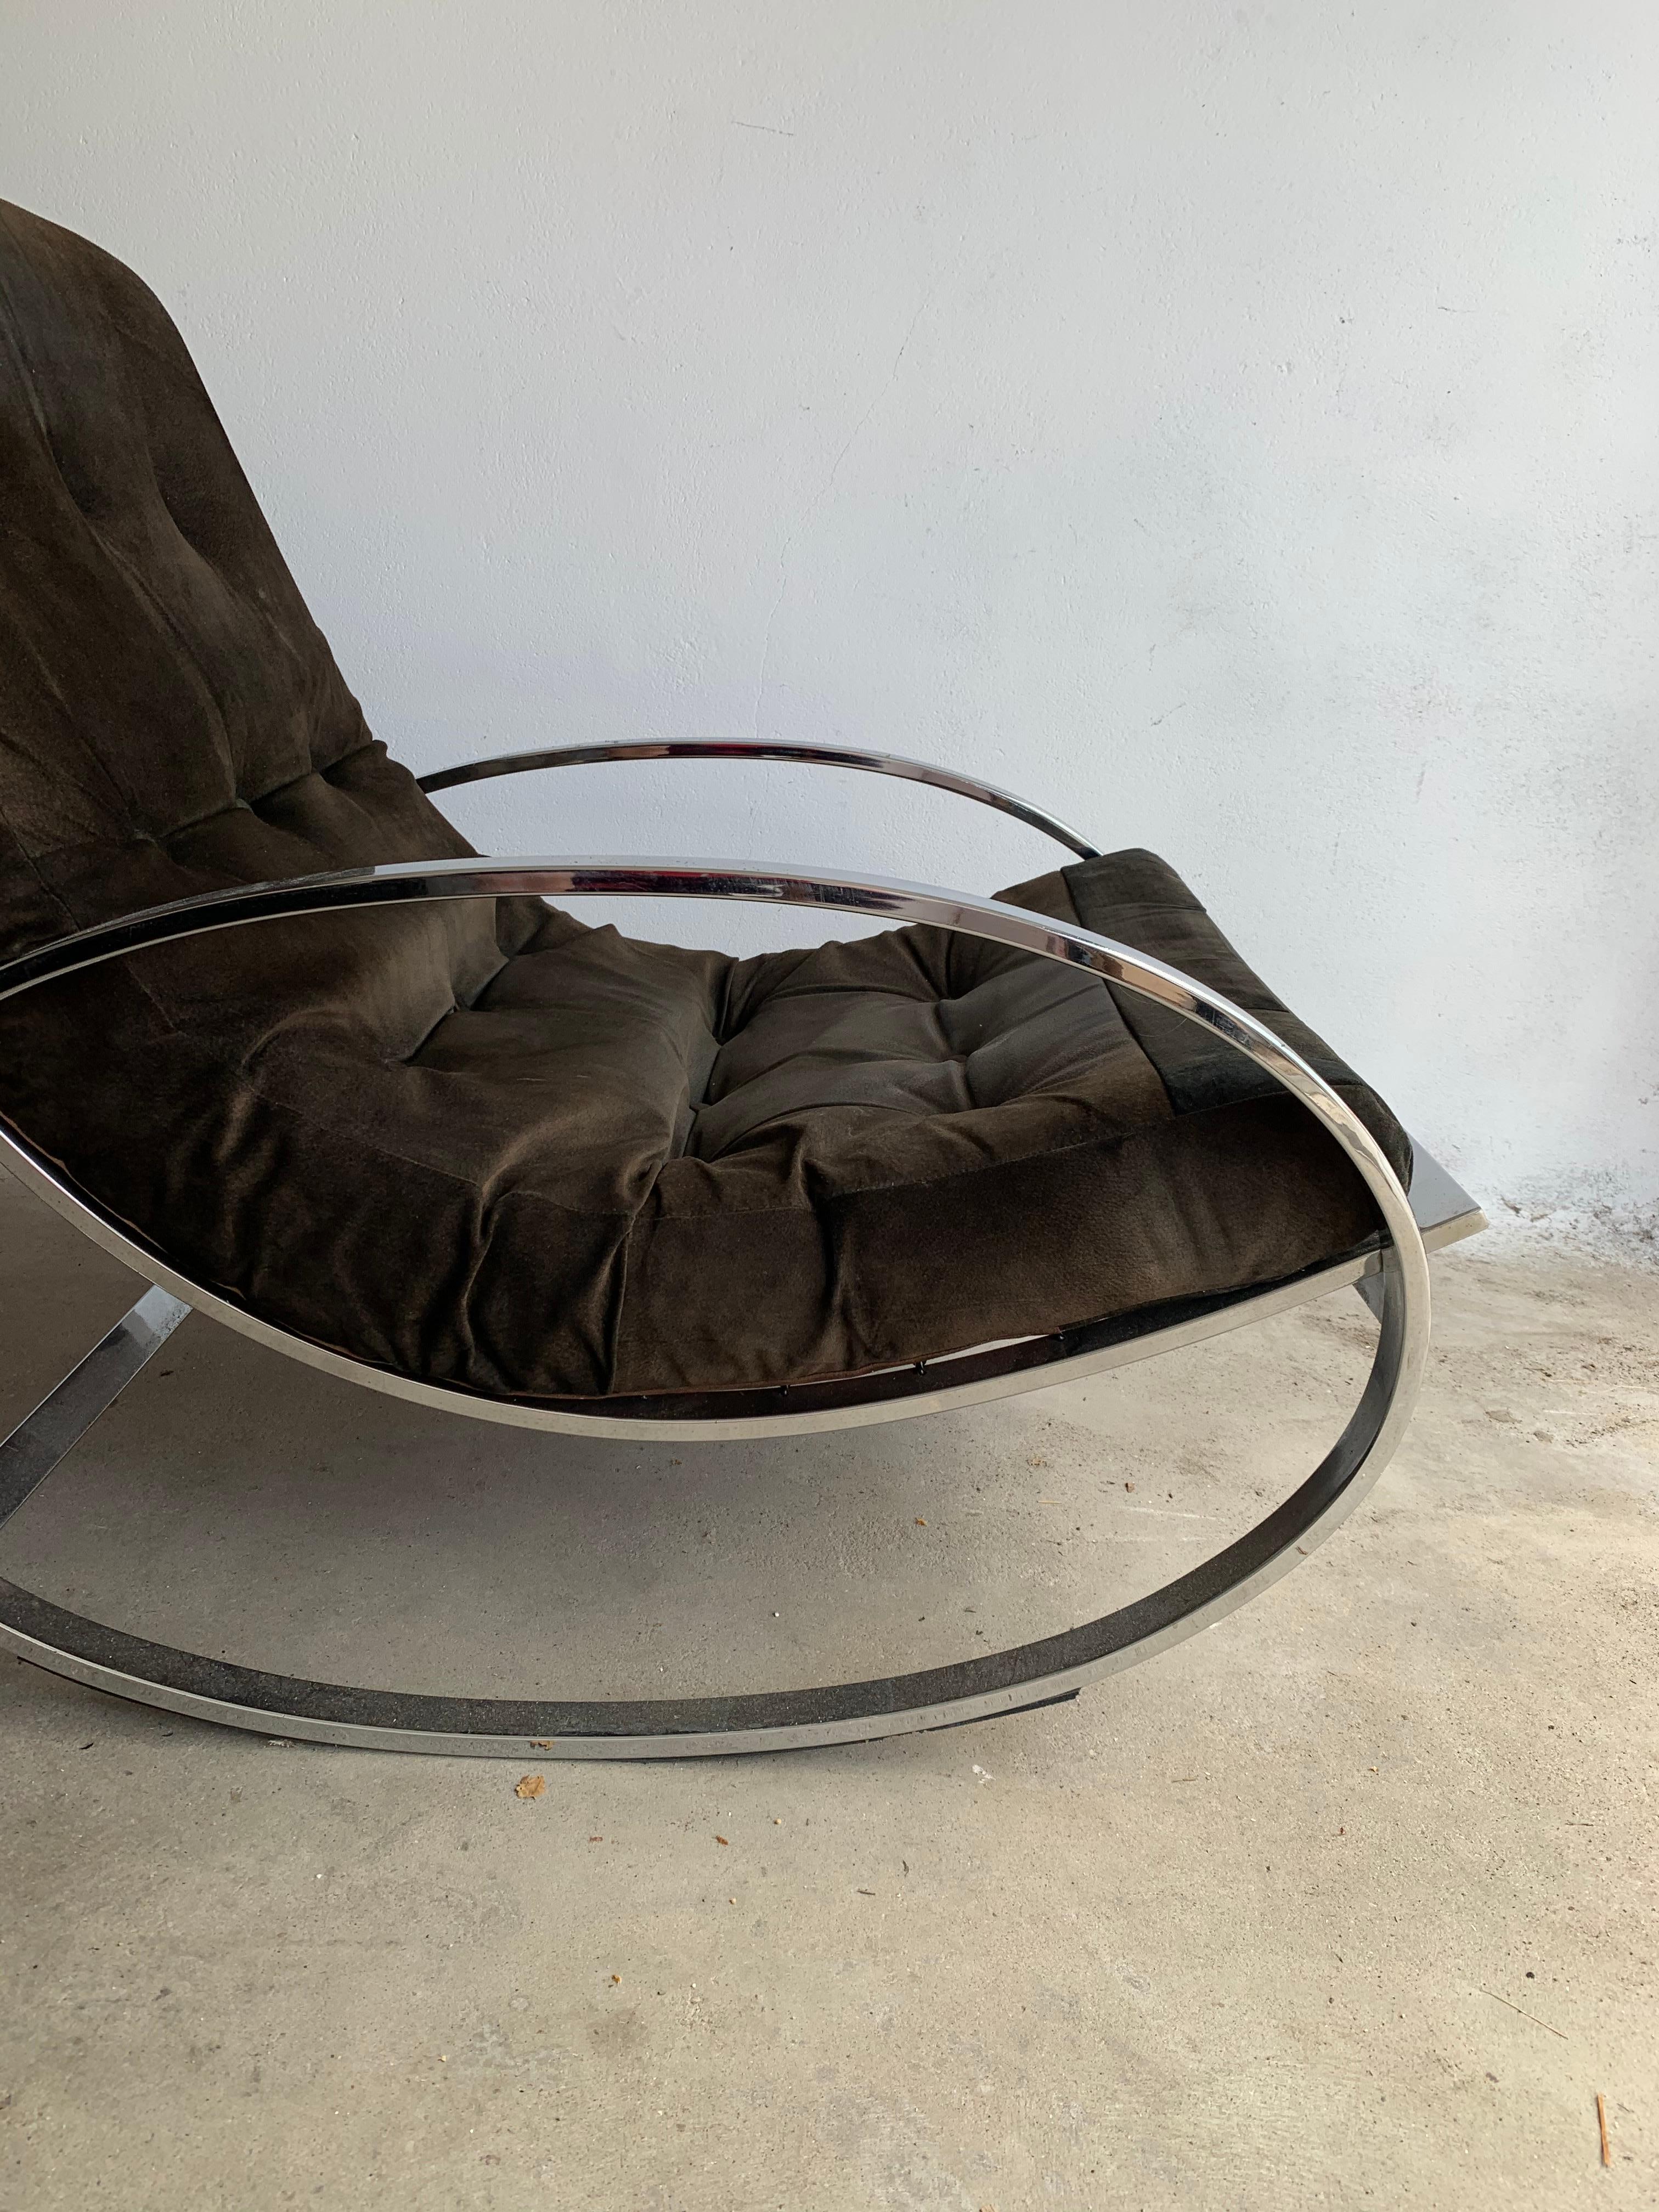 Original upholstery of natural nubuk that wraps the user in comfort and supported by a gently curved back and polished chrome frame in good original condition, This streamlined modernist chair is the ultimate in luxurious comfort. Produced, circa